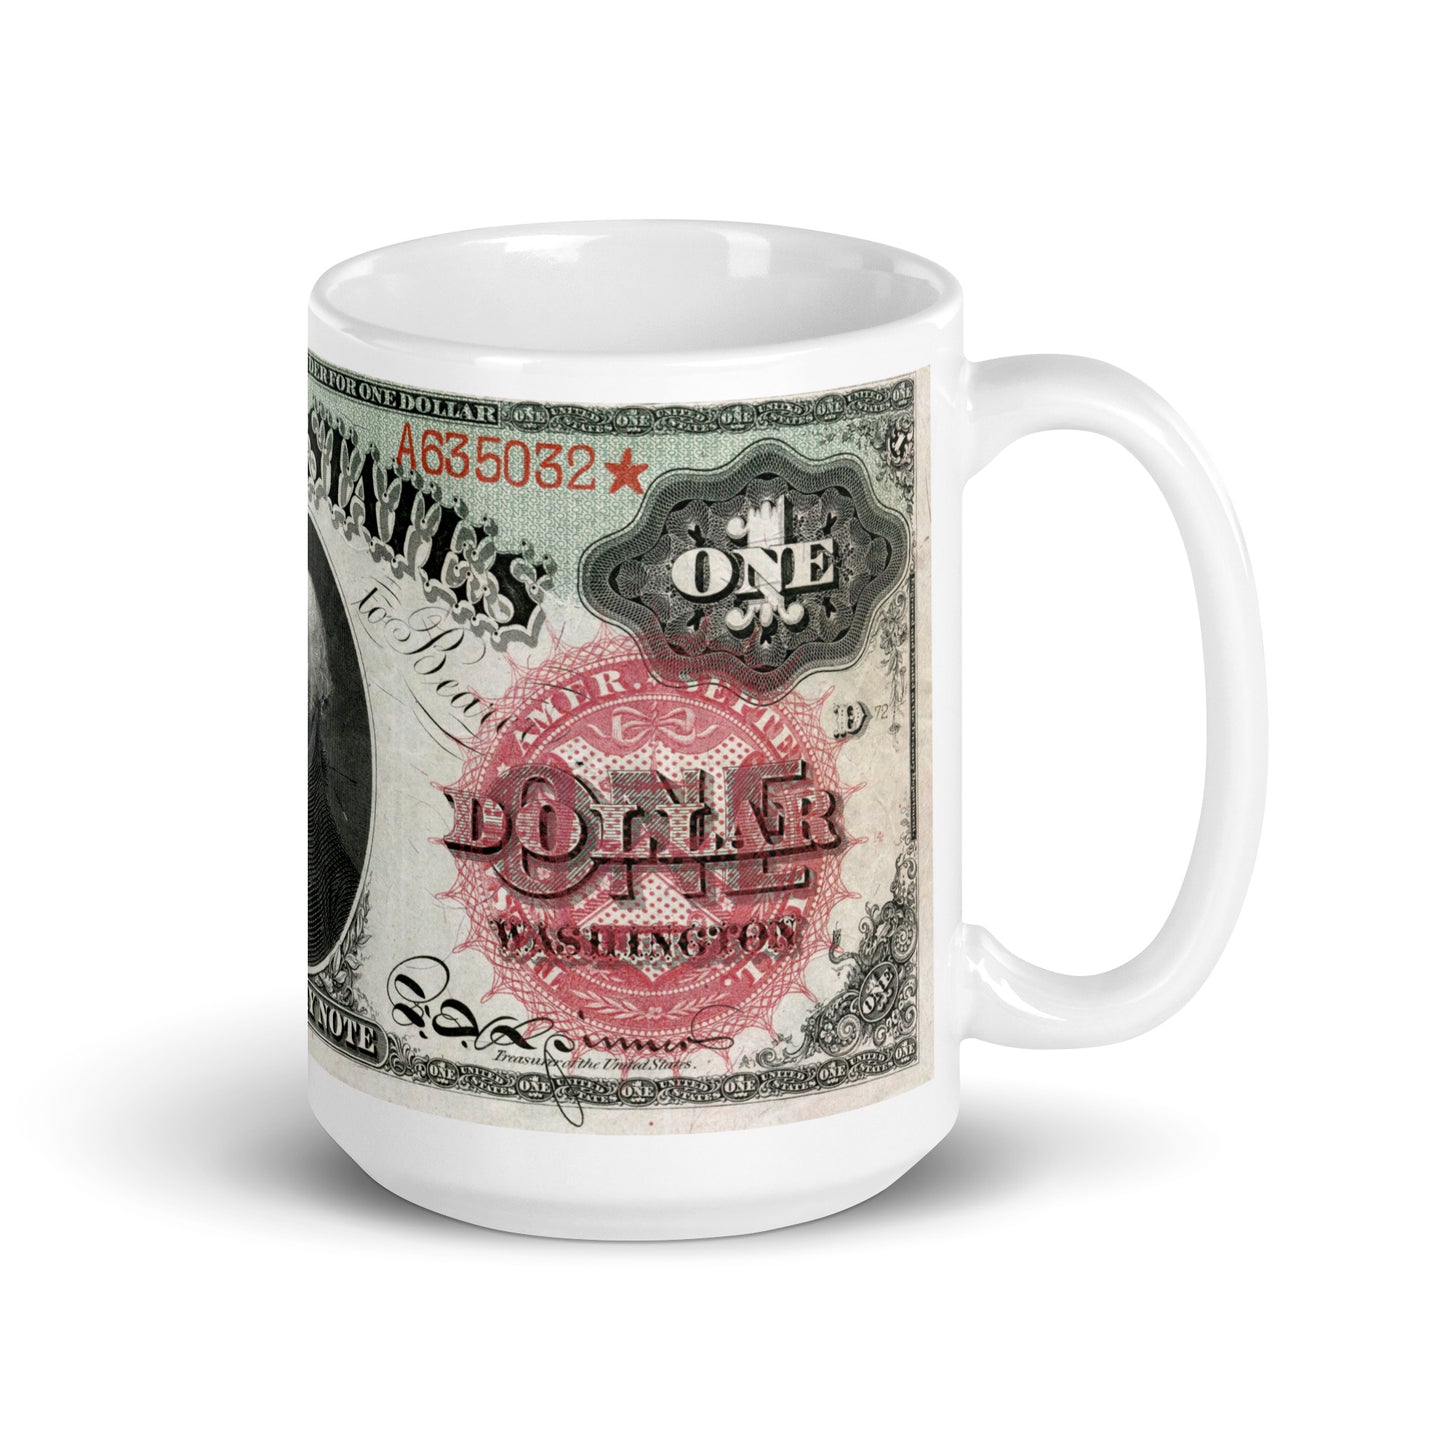 $1 Series 1869 Legal Tender Note (Front) Edition - Classic Currency Collector's Mug